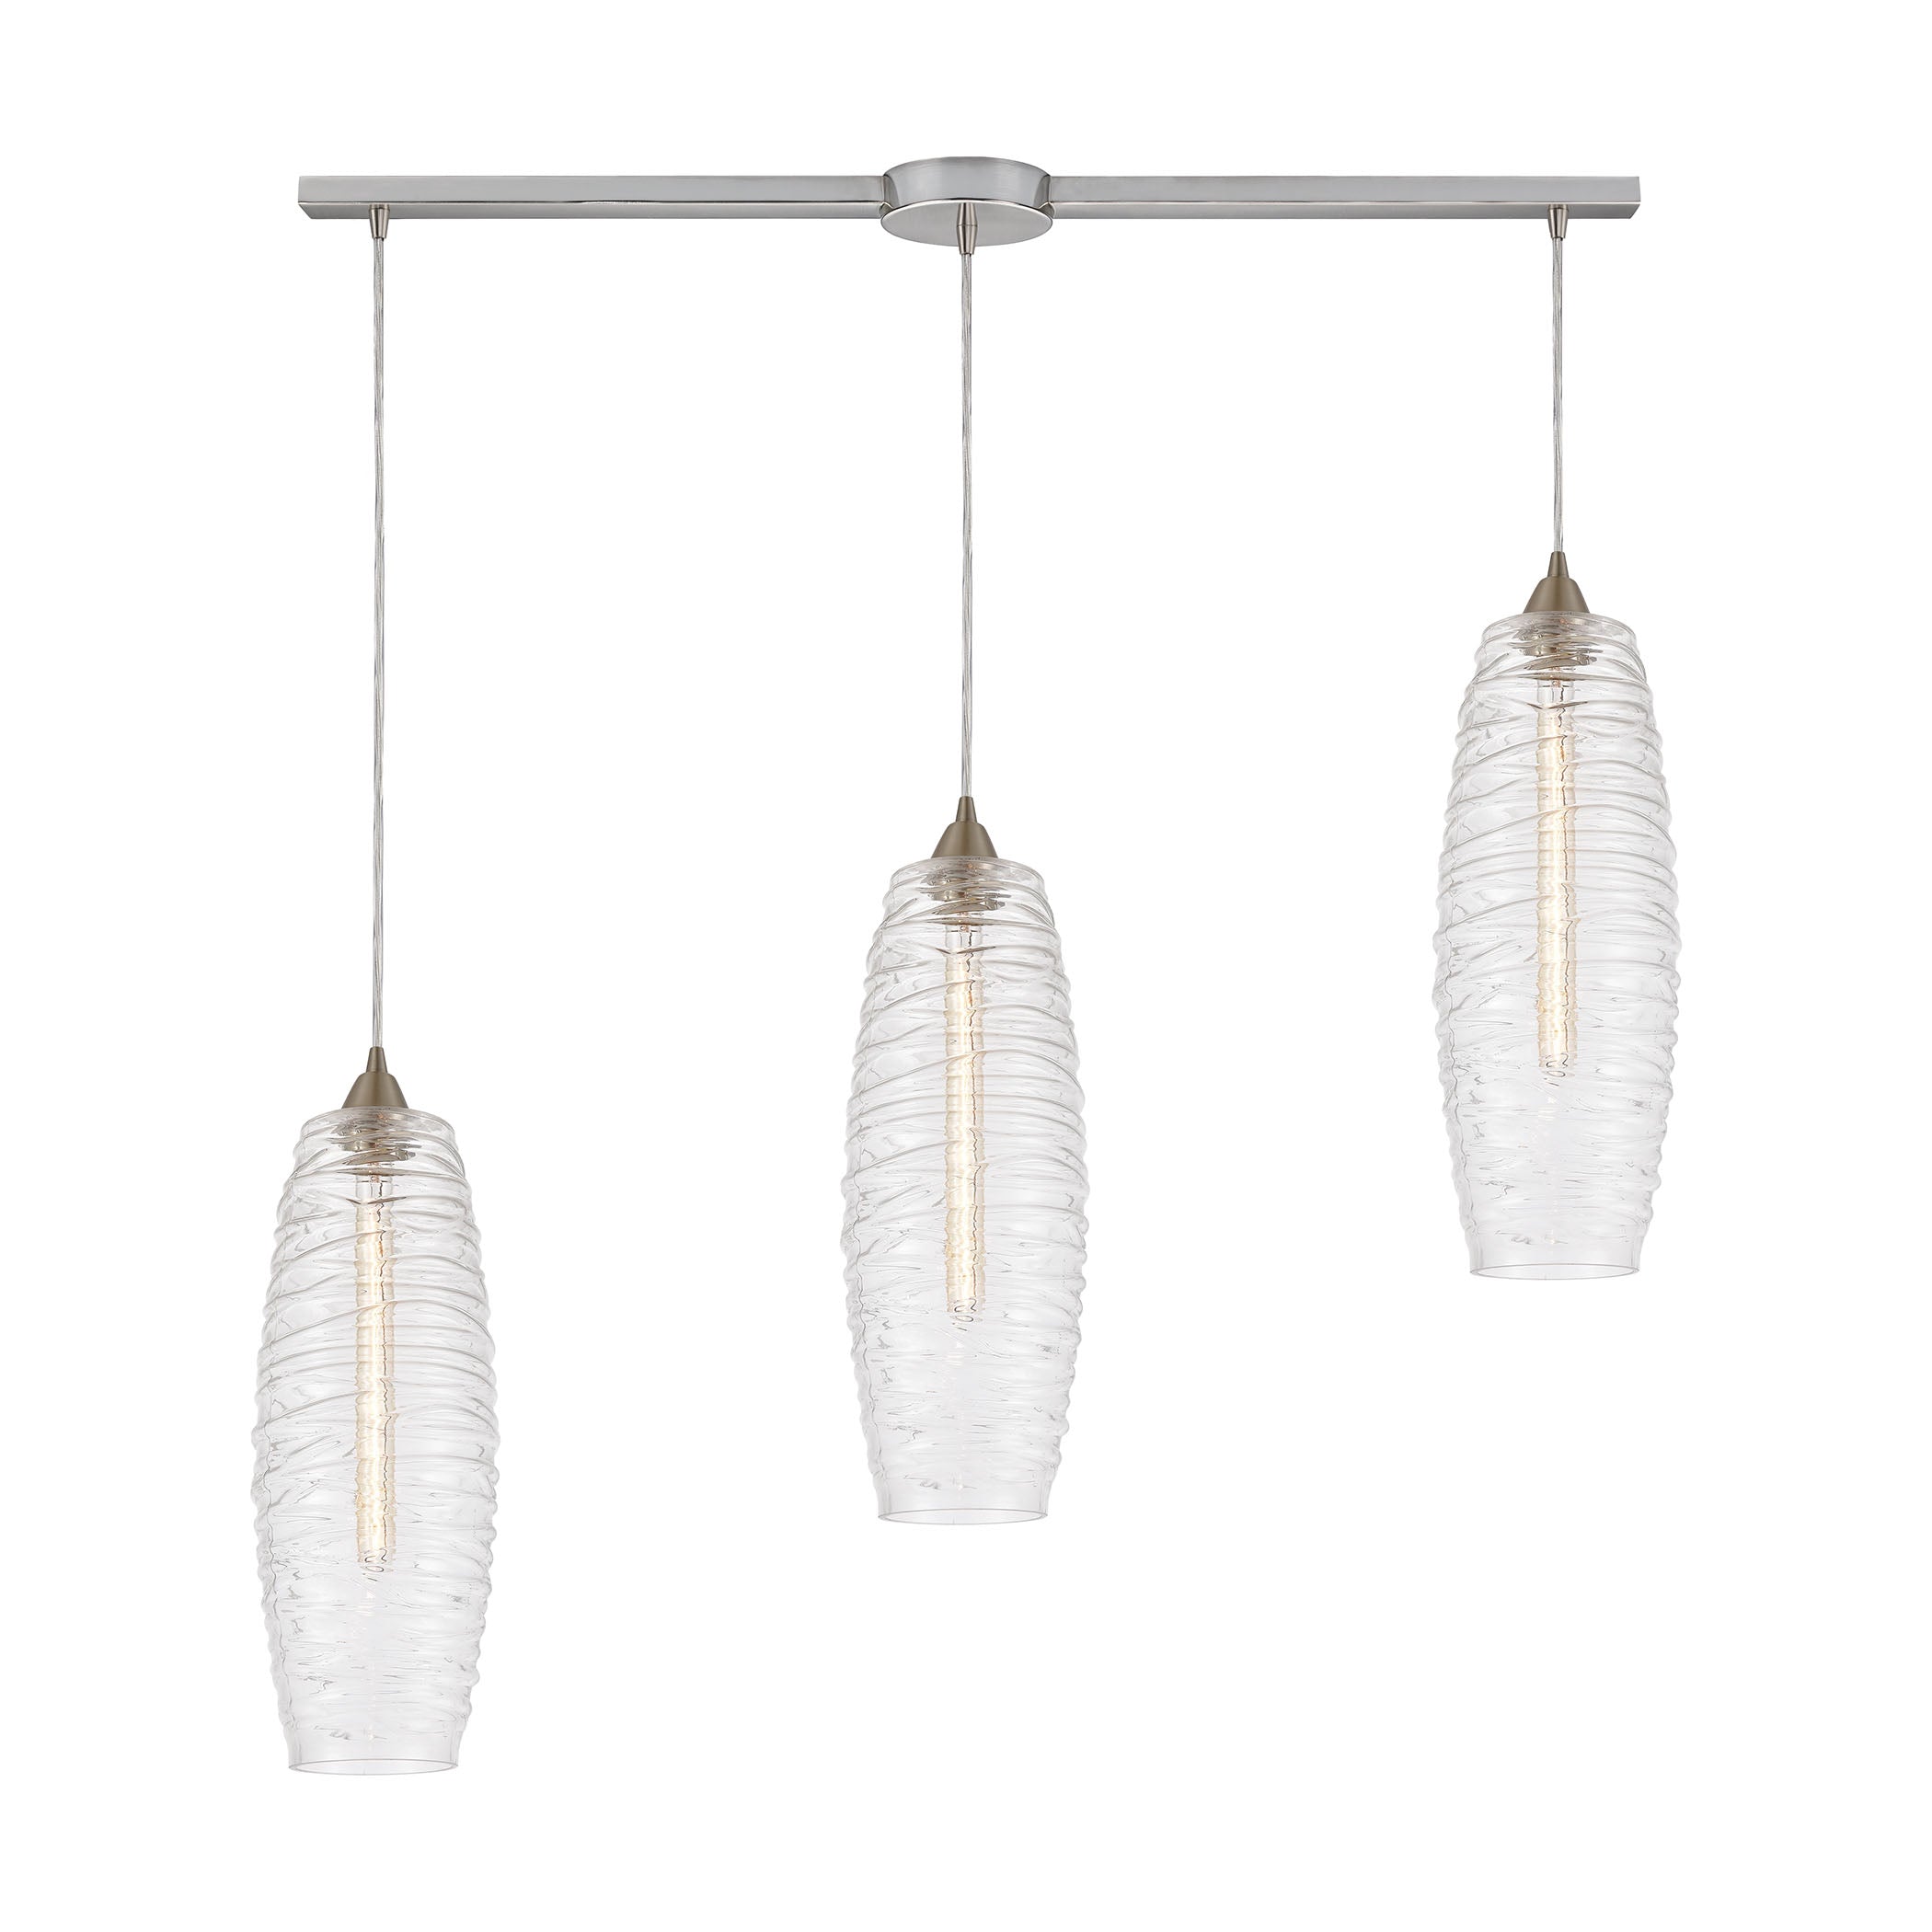 ELK Lighting 21192/3L Liz 3-Light Linear Mini Pendant Fixture in Satin Nickel with Clear Glass with Ribbed Swirls